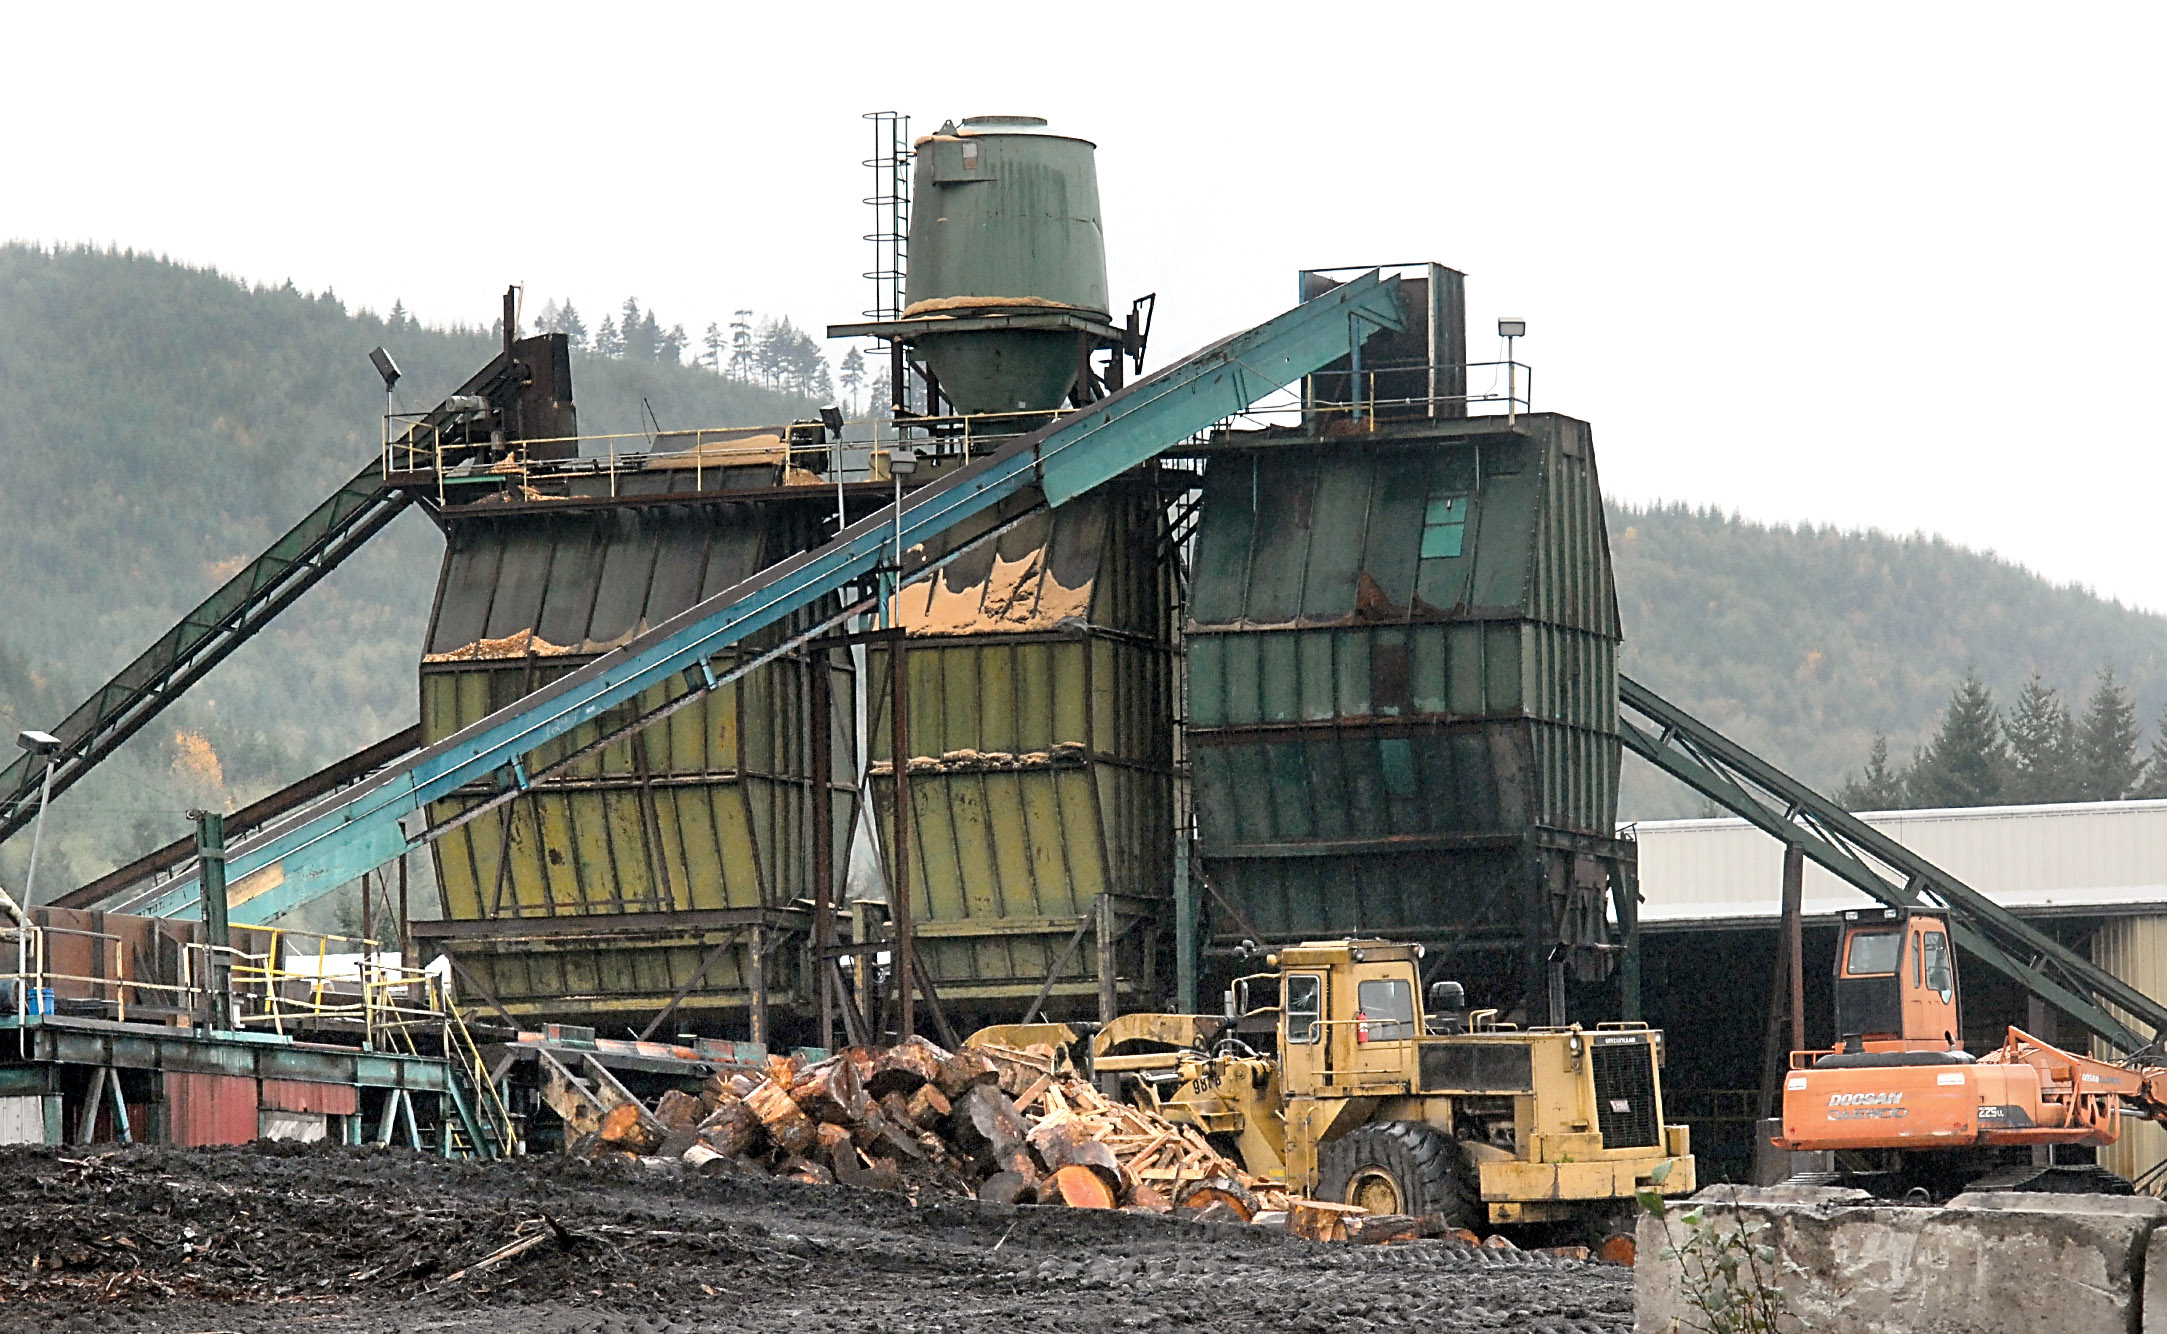 Equipment sits idle at the Green Creek Wood Products location in the Eclipse Industrial Park on the west edge of Port Angeles on Thursday. — Keith Thorpe/Peninsula Daily News